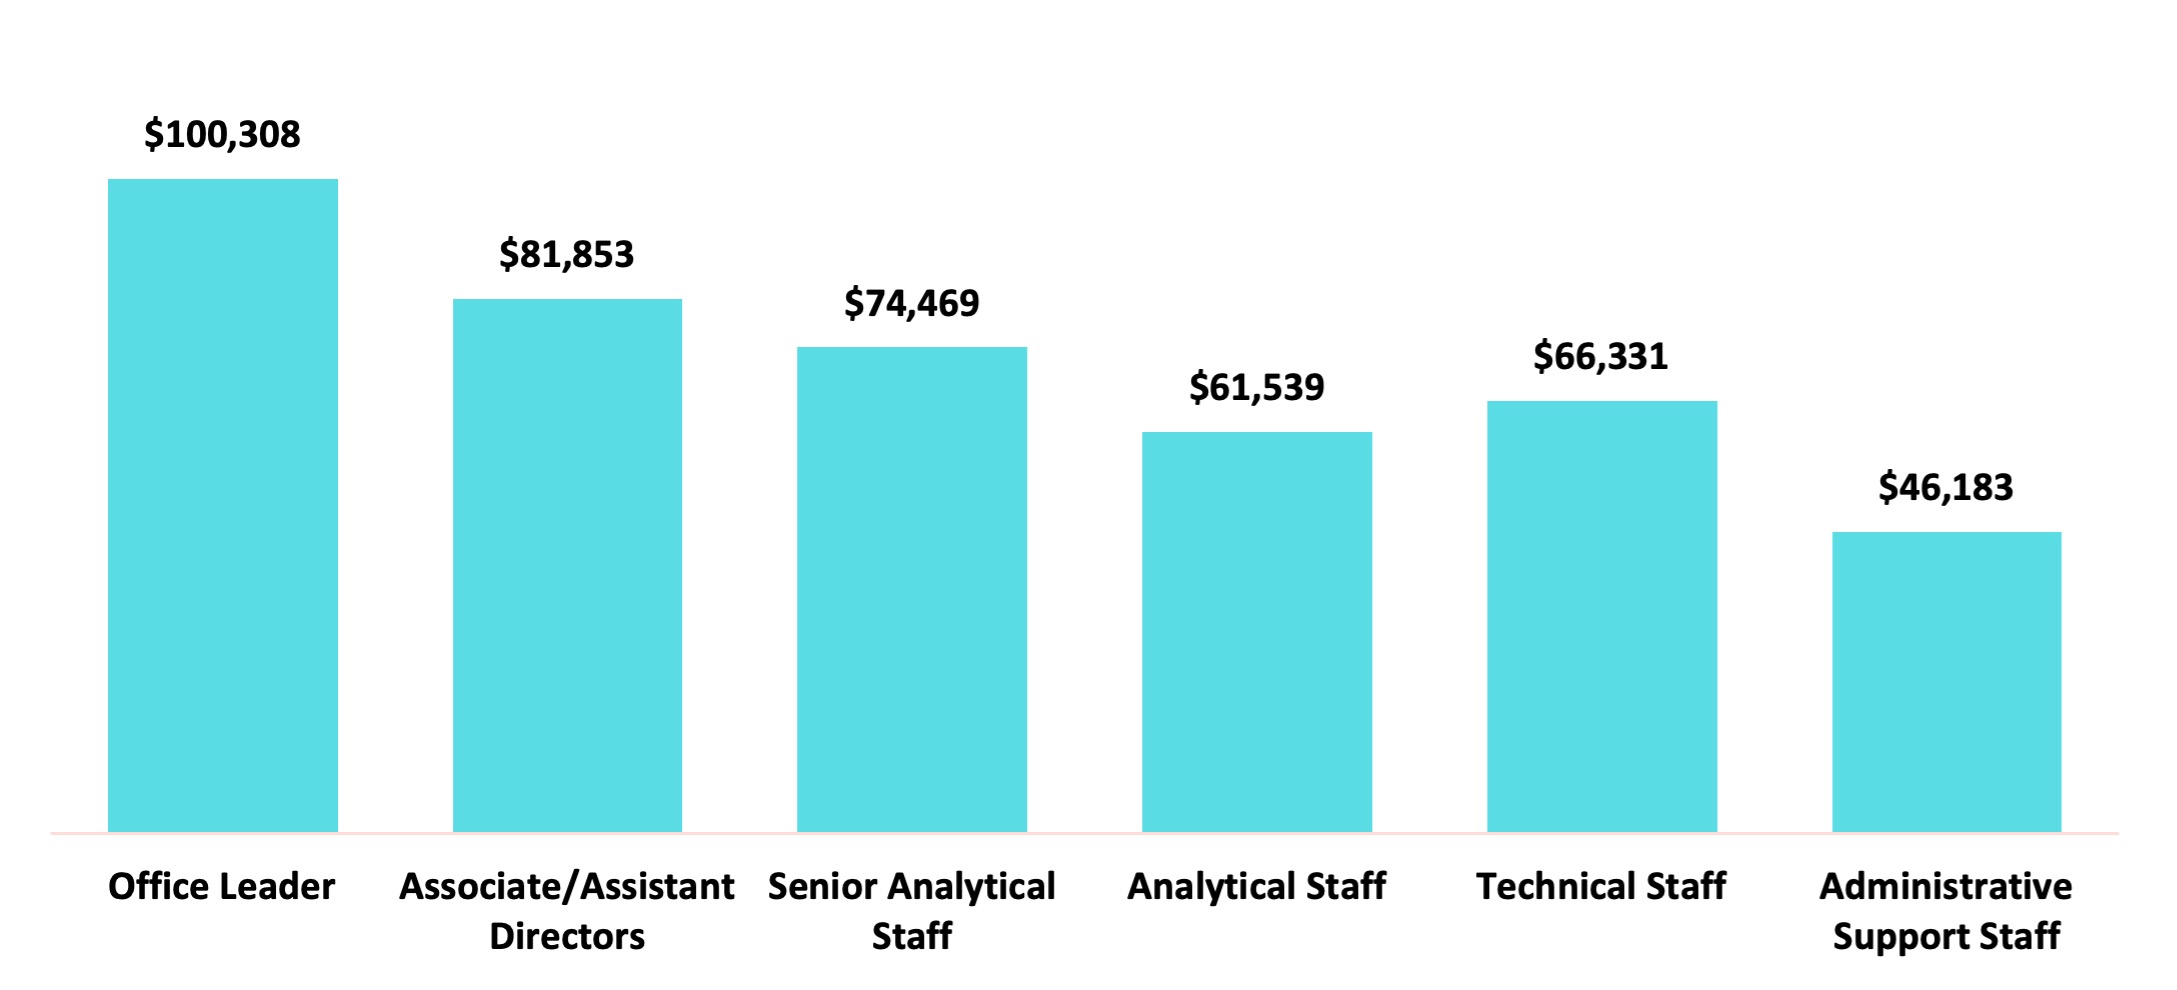 Bar chart showing: Office Leader: $100,308; Associate/
Assistant Directors: $81,853; Senior Analytical
Staff: $74,469; 
Analytical Staff: $61,539;
Technical Staff	$66,331;
Administrative Support Staff: $46,183